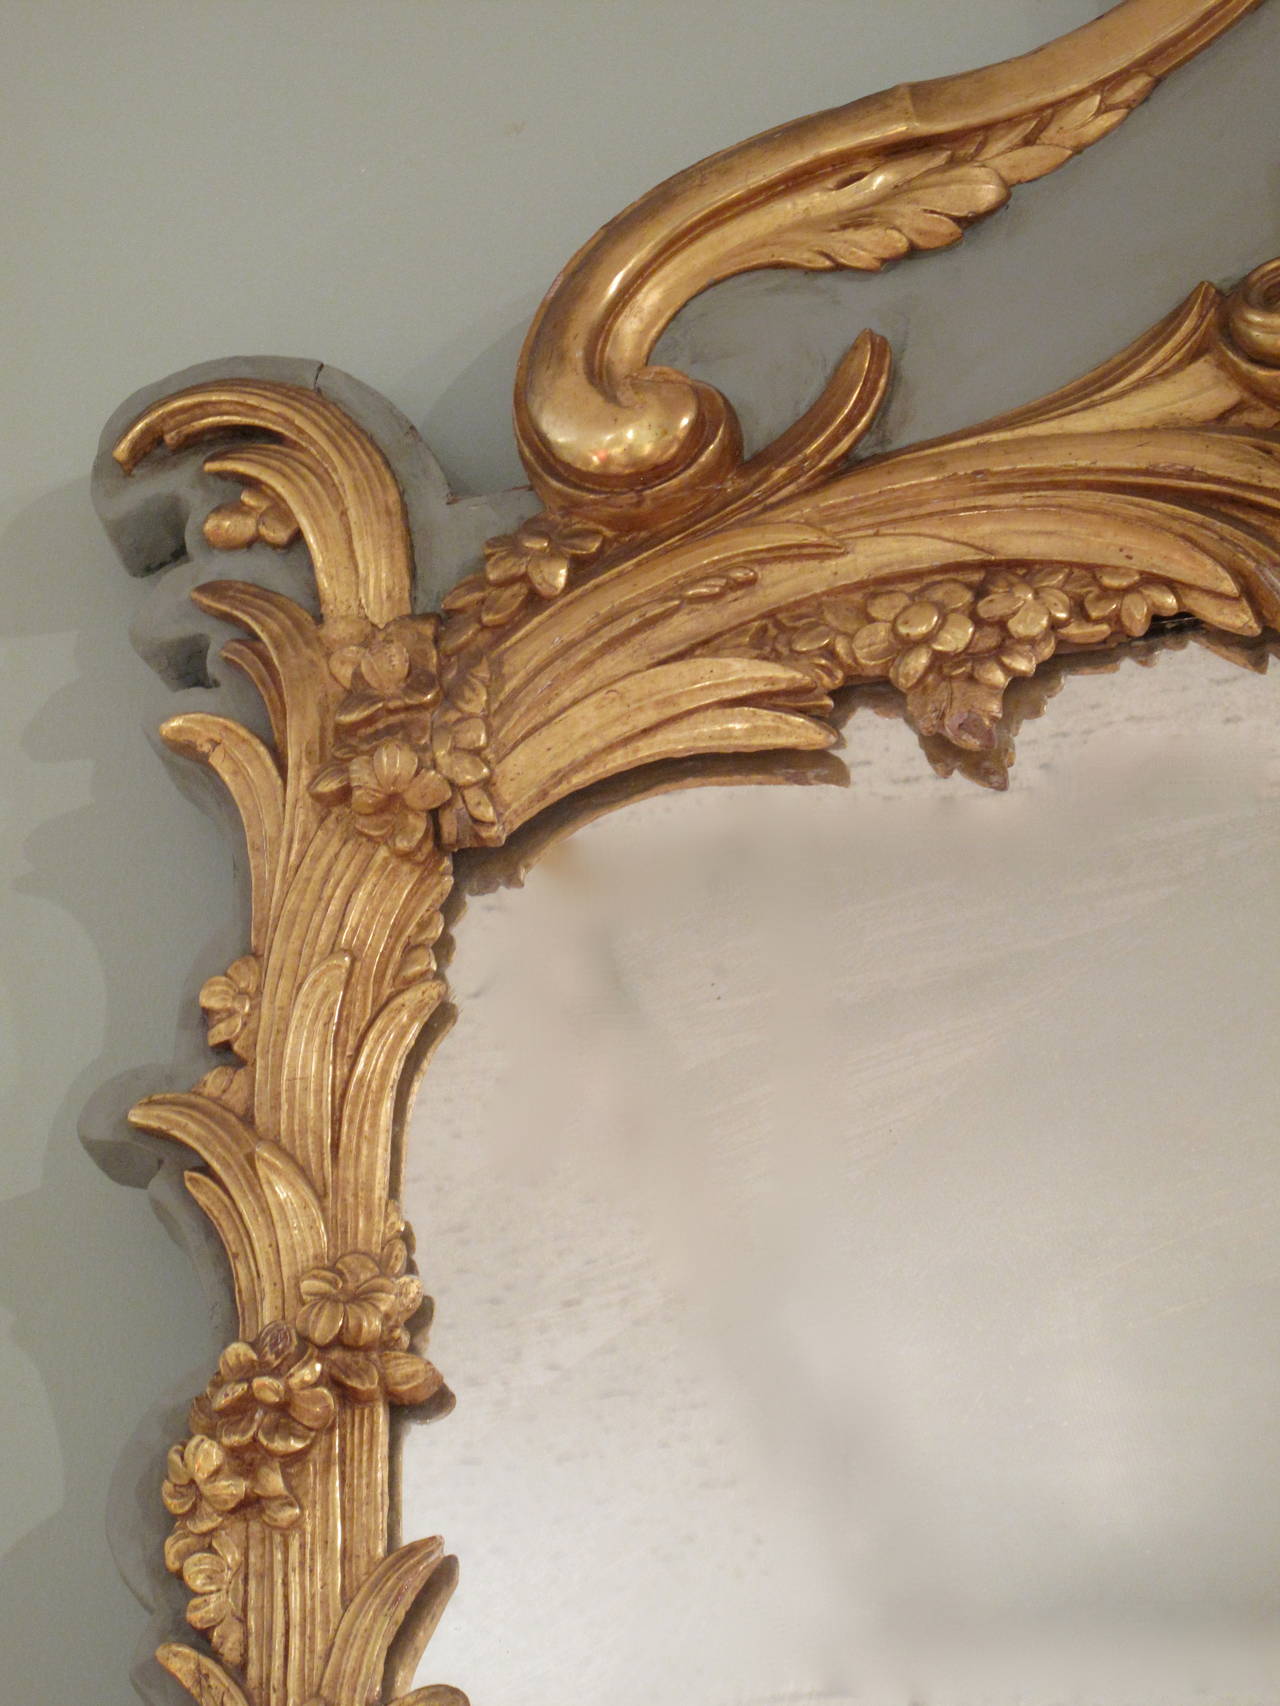 An elegant carved giltwood on grey ground crested mirror, late 19th century, the sides comprised of gathered palm fronds encircled by delicate floral garlands. The palm fronds spring from Rococo shell and leaf ornament at the base of the mirror and